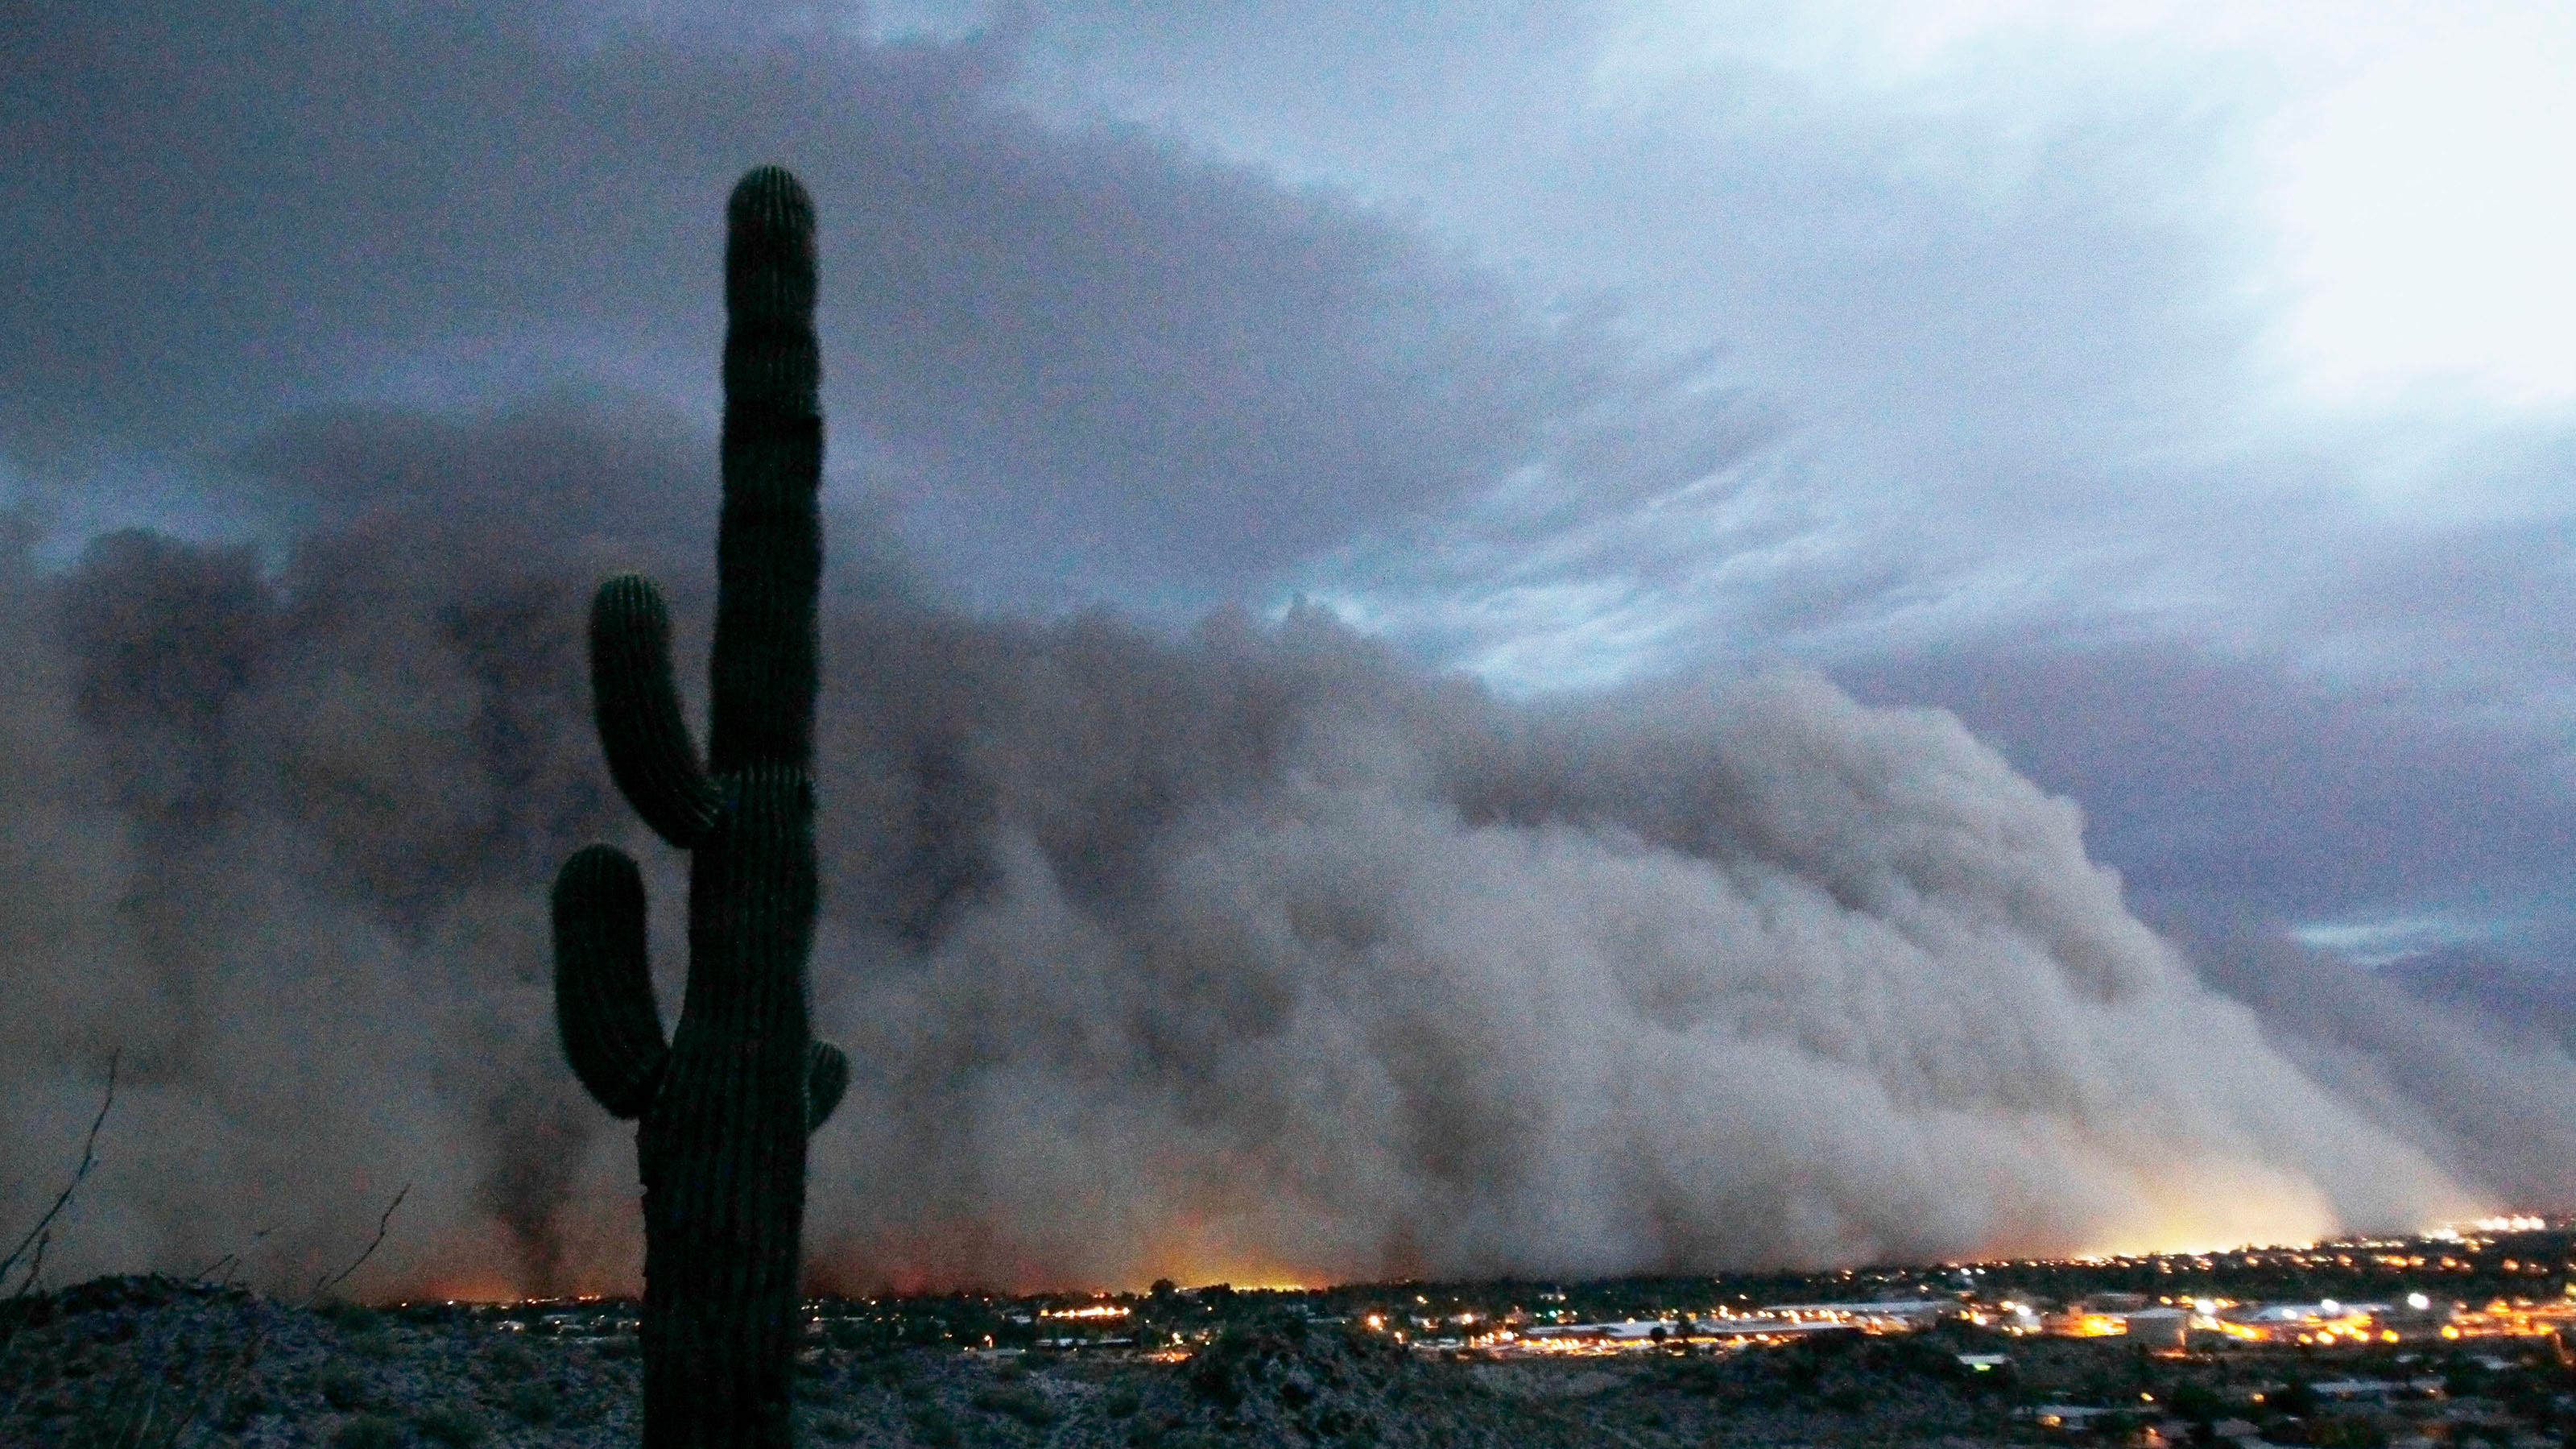 What's a haboob and when did Arizona start using that word?